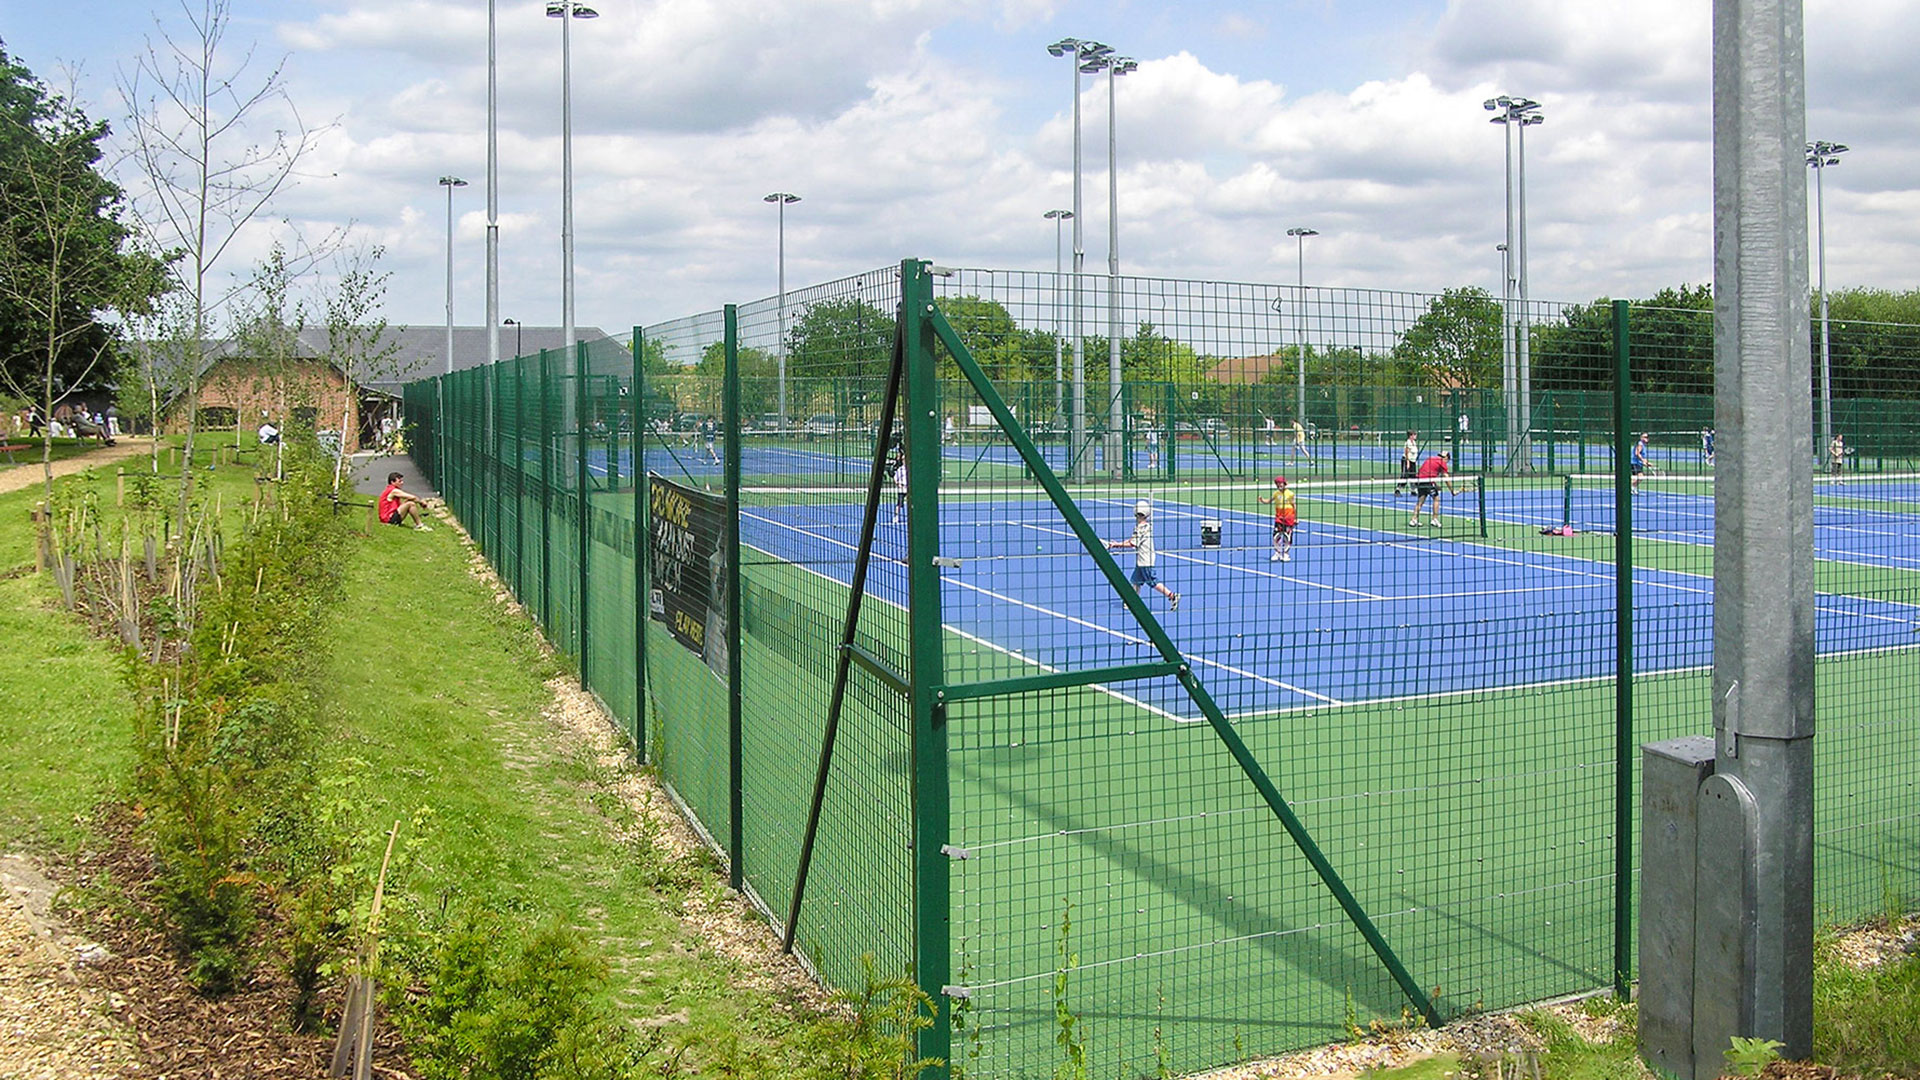 side view of fenced tennis courts from path